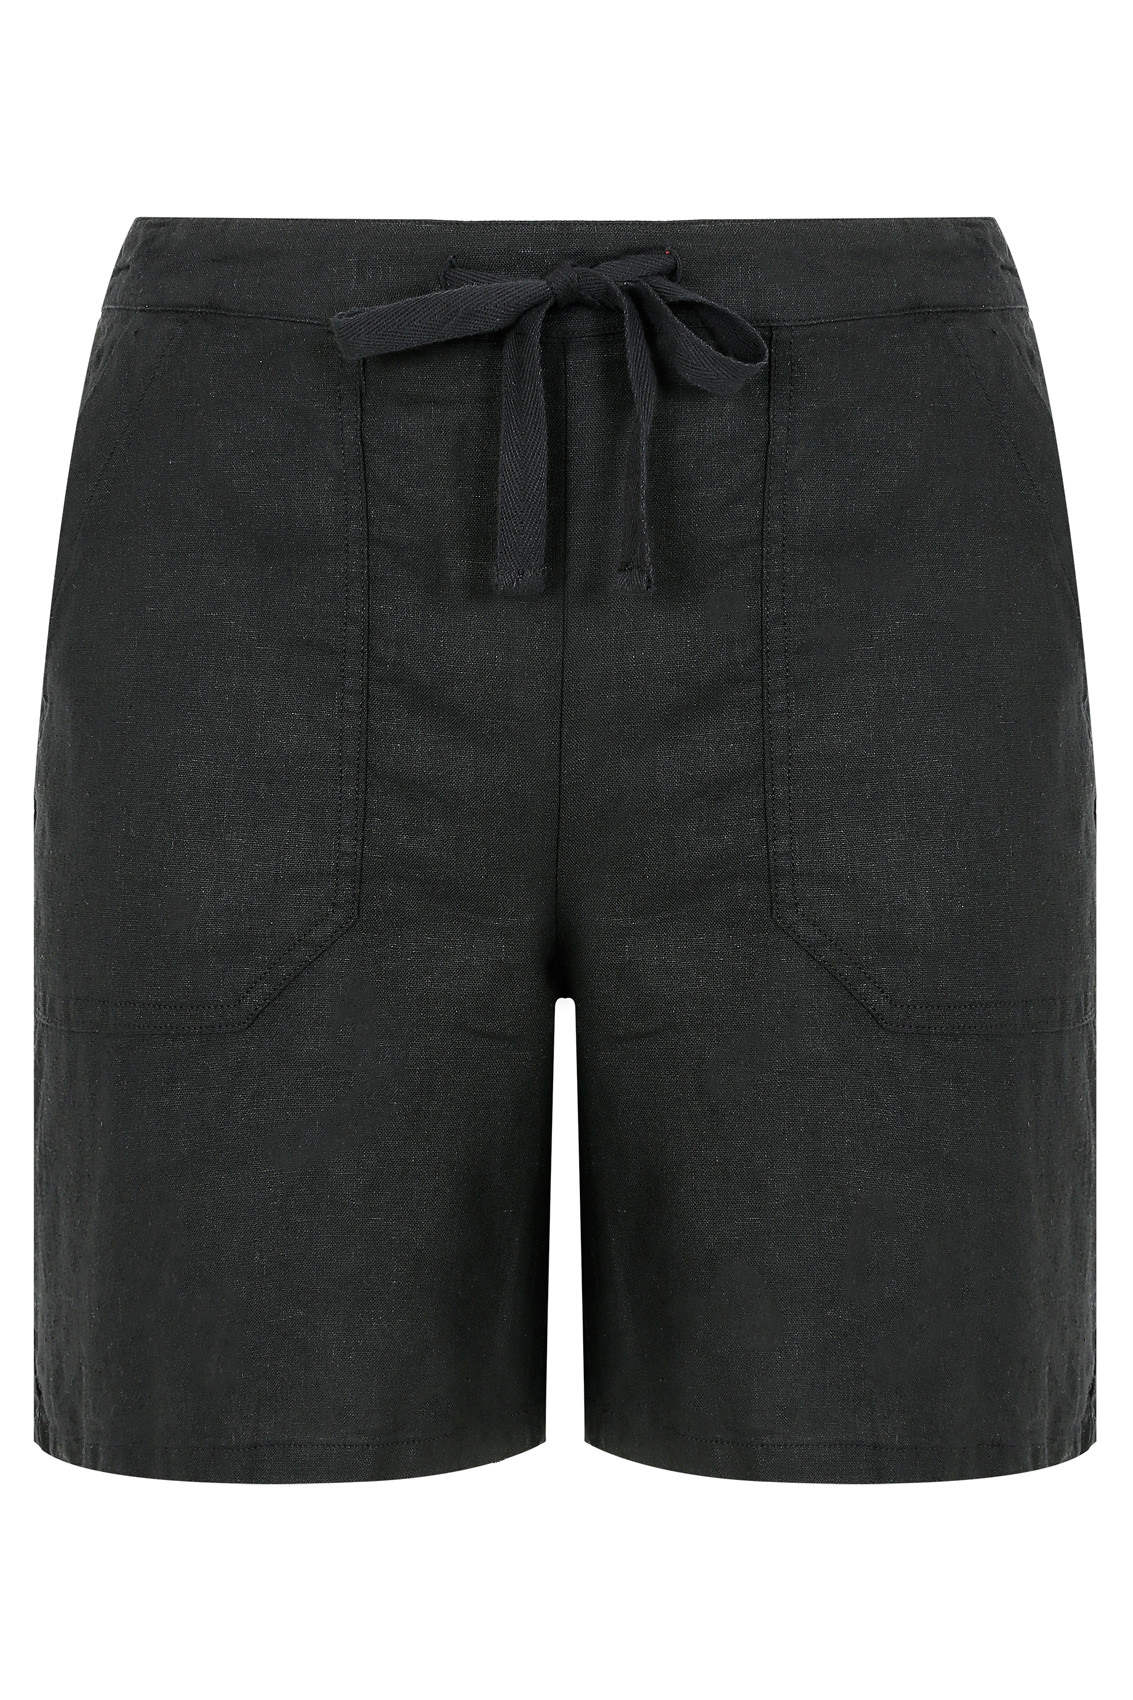 Black Linen Mix Pull On Shorts With Pockets, Plus size 16 to 36